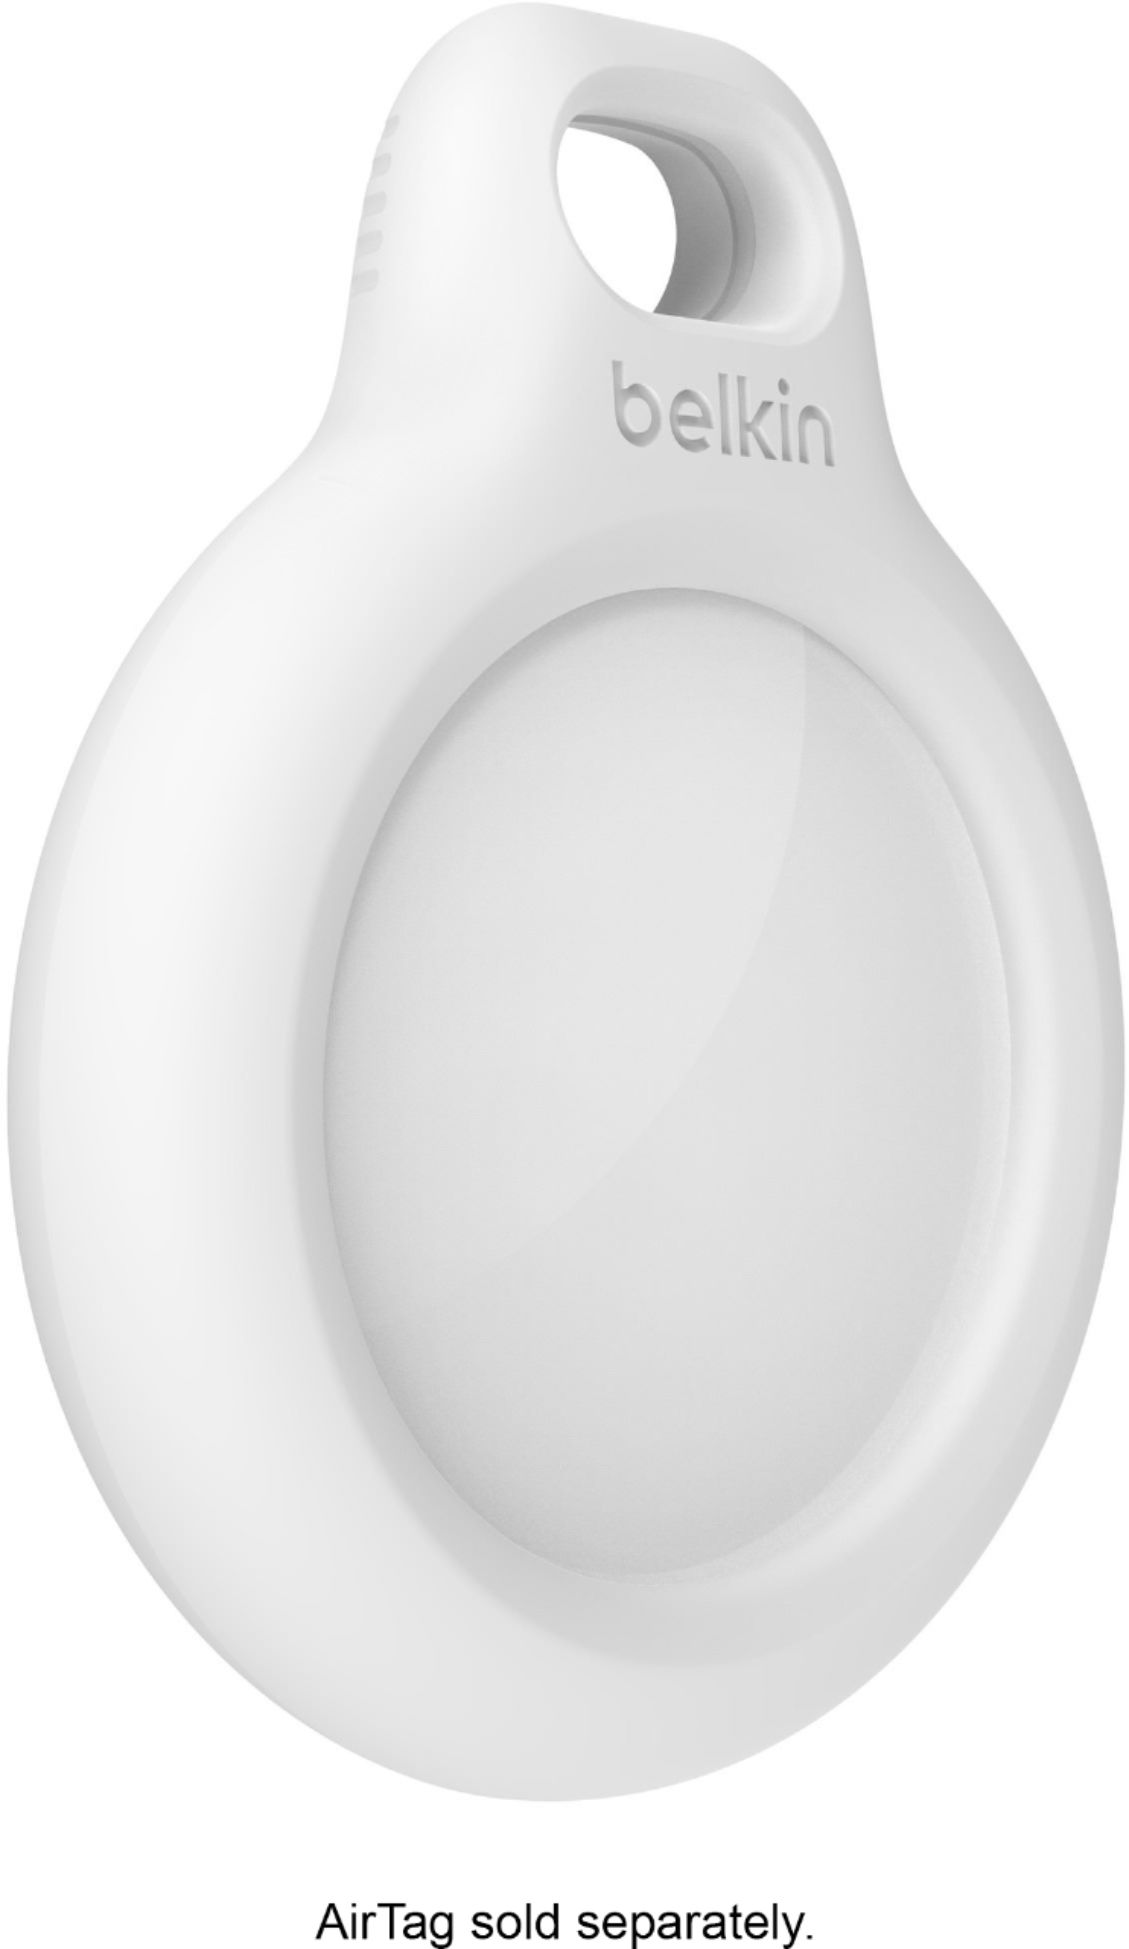 Belkin Secure Holder with Key Ring for Apple AirTag F8W973BTWHT